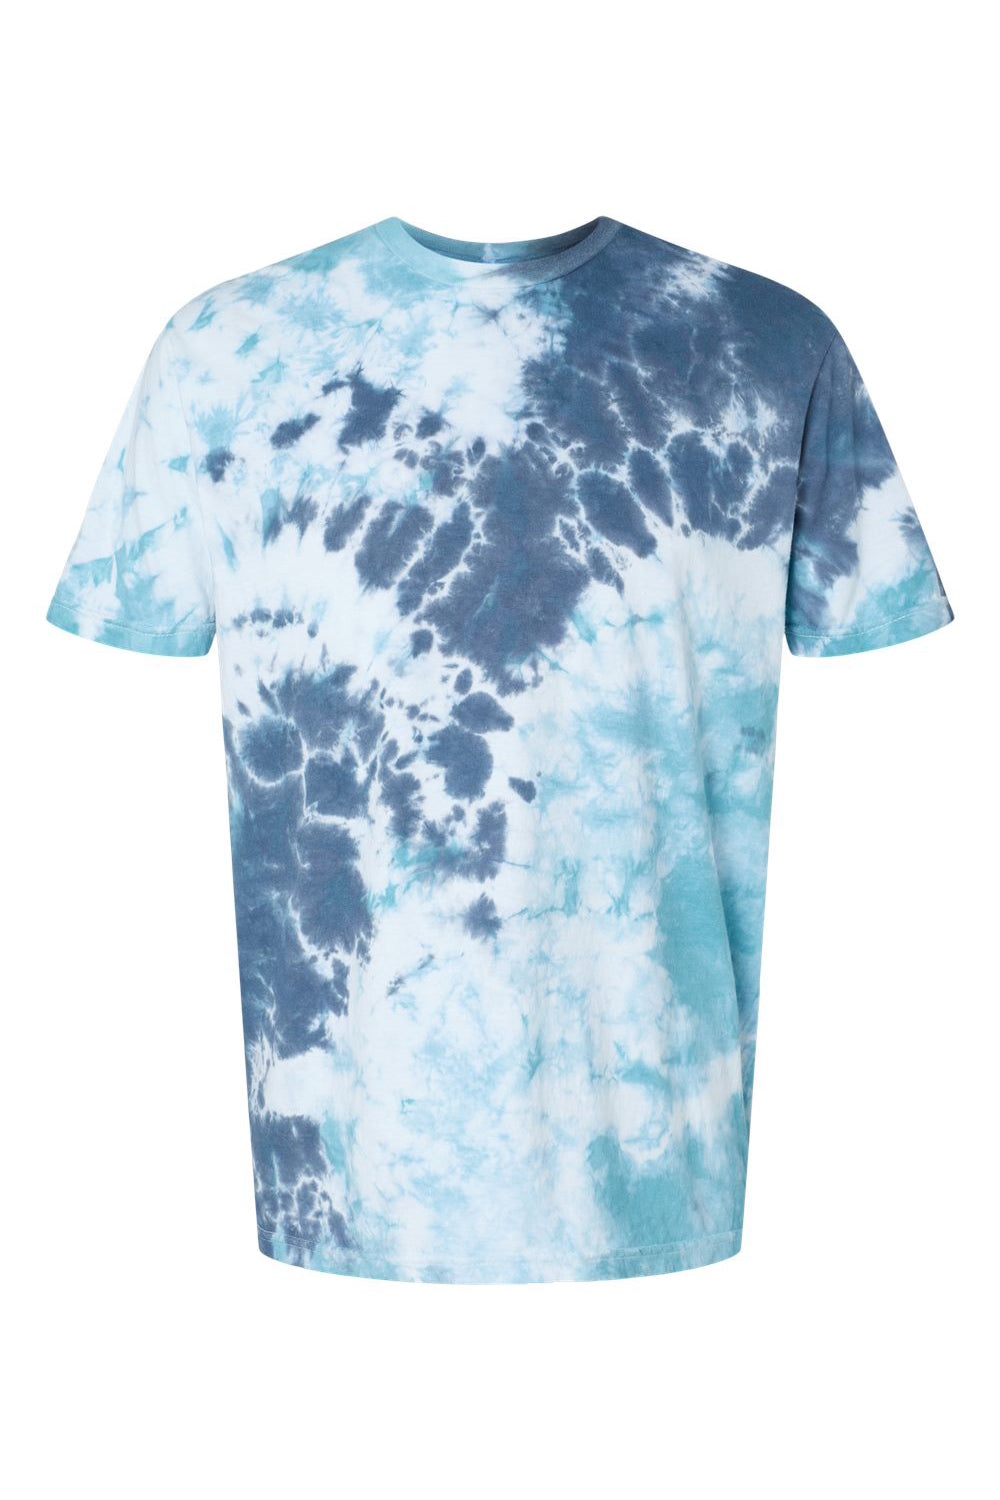 Dyenomite 640LM Mens LaMer Over Dyed Crinkle Tie Dyed Short Sleeve Crewneck T-Shirt Gulf Flat Front